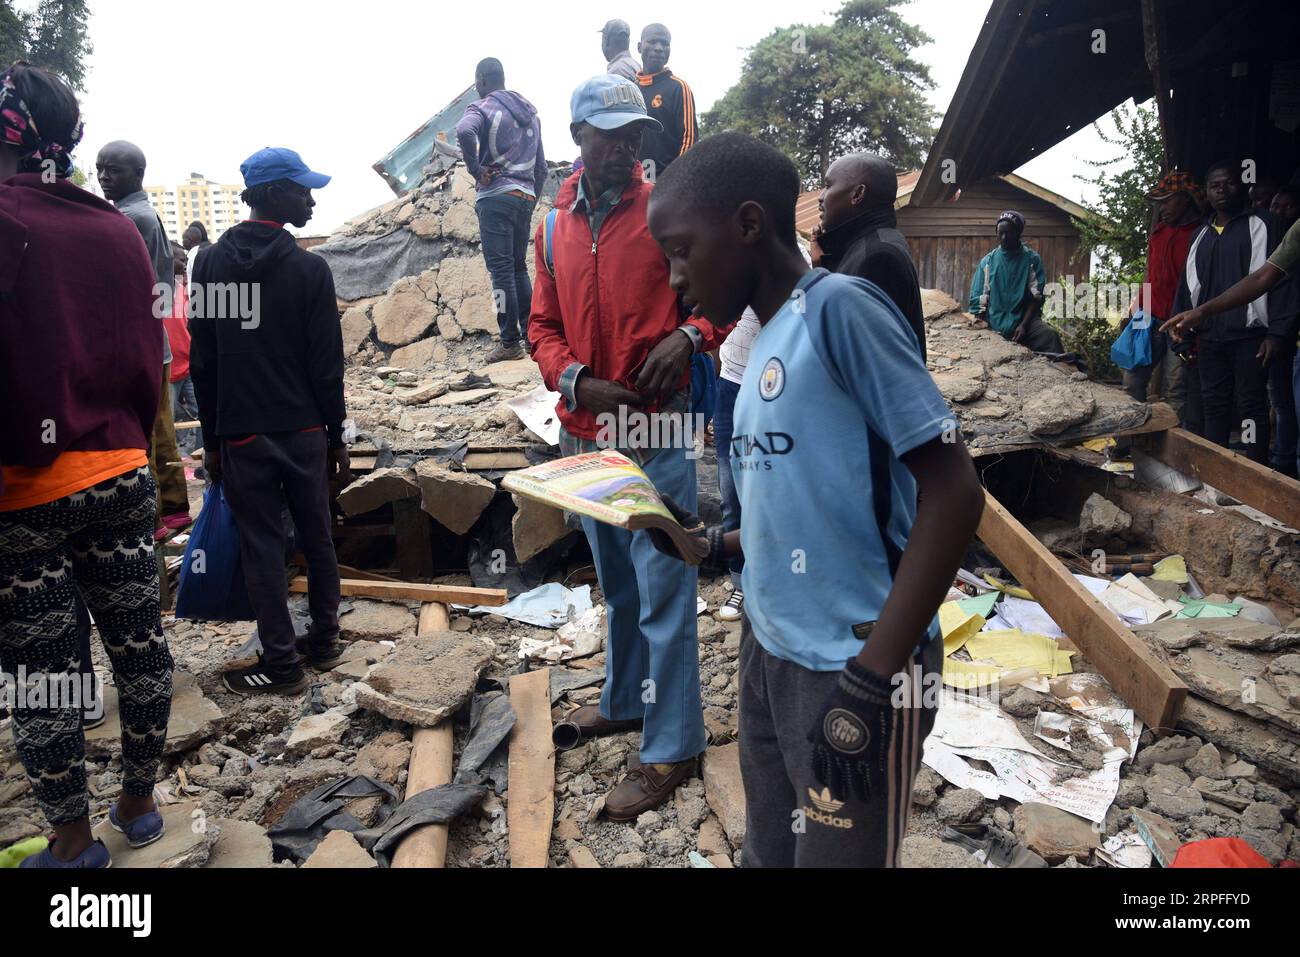 190923 -- NAIROBI, Sept. 23, 2019 Xinhua -- People stand at the scene where a classroom collapsed in Nairobi, capital of Kenya, on Sept. 23, 2019. At least seven pupils were killed and 59 others injured early Monday after their classroom collapsed at a school compound in Nairobi, government and charity officials said. Photo by John Okoyo/Xinhua KENYA-NAIROBI-CLASSROOM-COLLAPSE PUBLICATIONxNOTxINxCHN Stock Photo